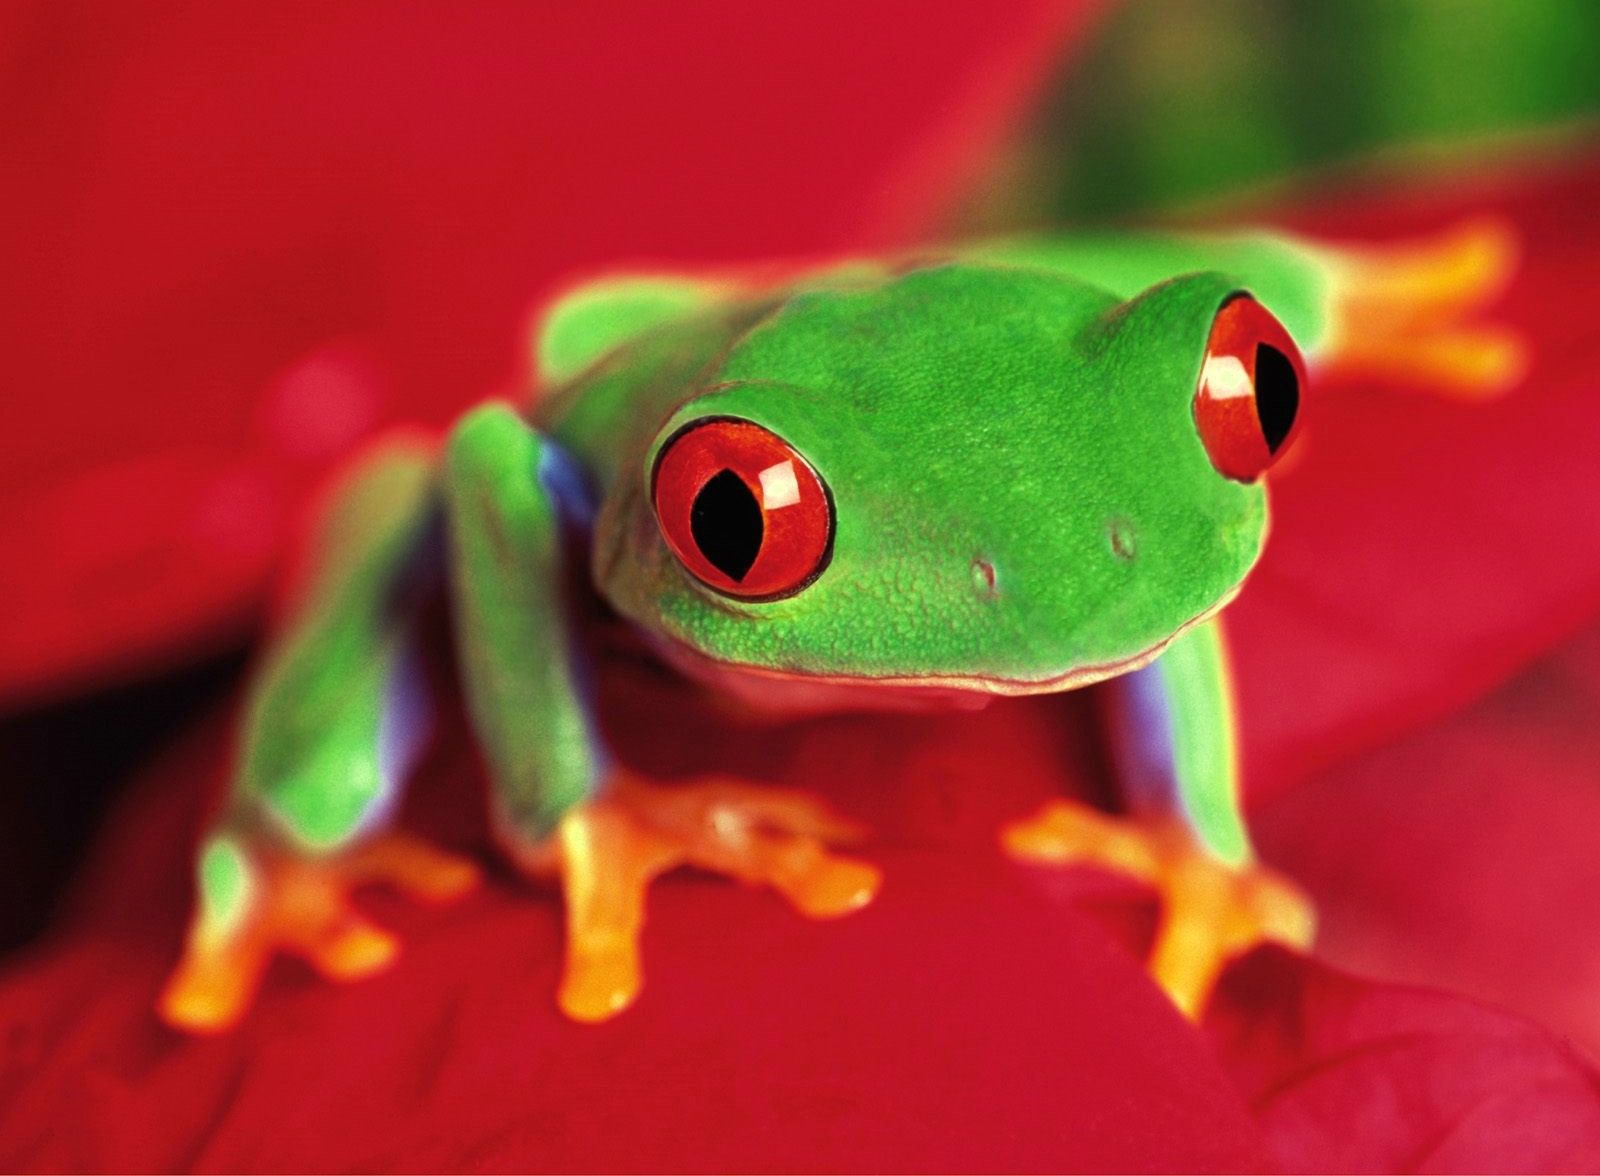 Frog Beautiful Skin Colors Cute and Docile